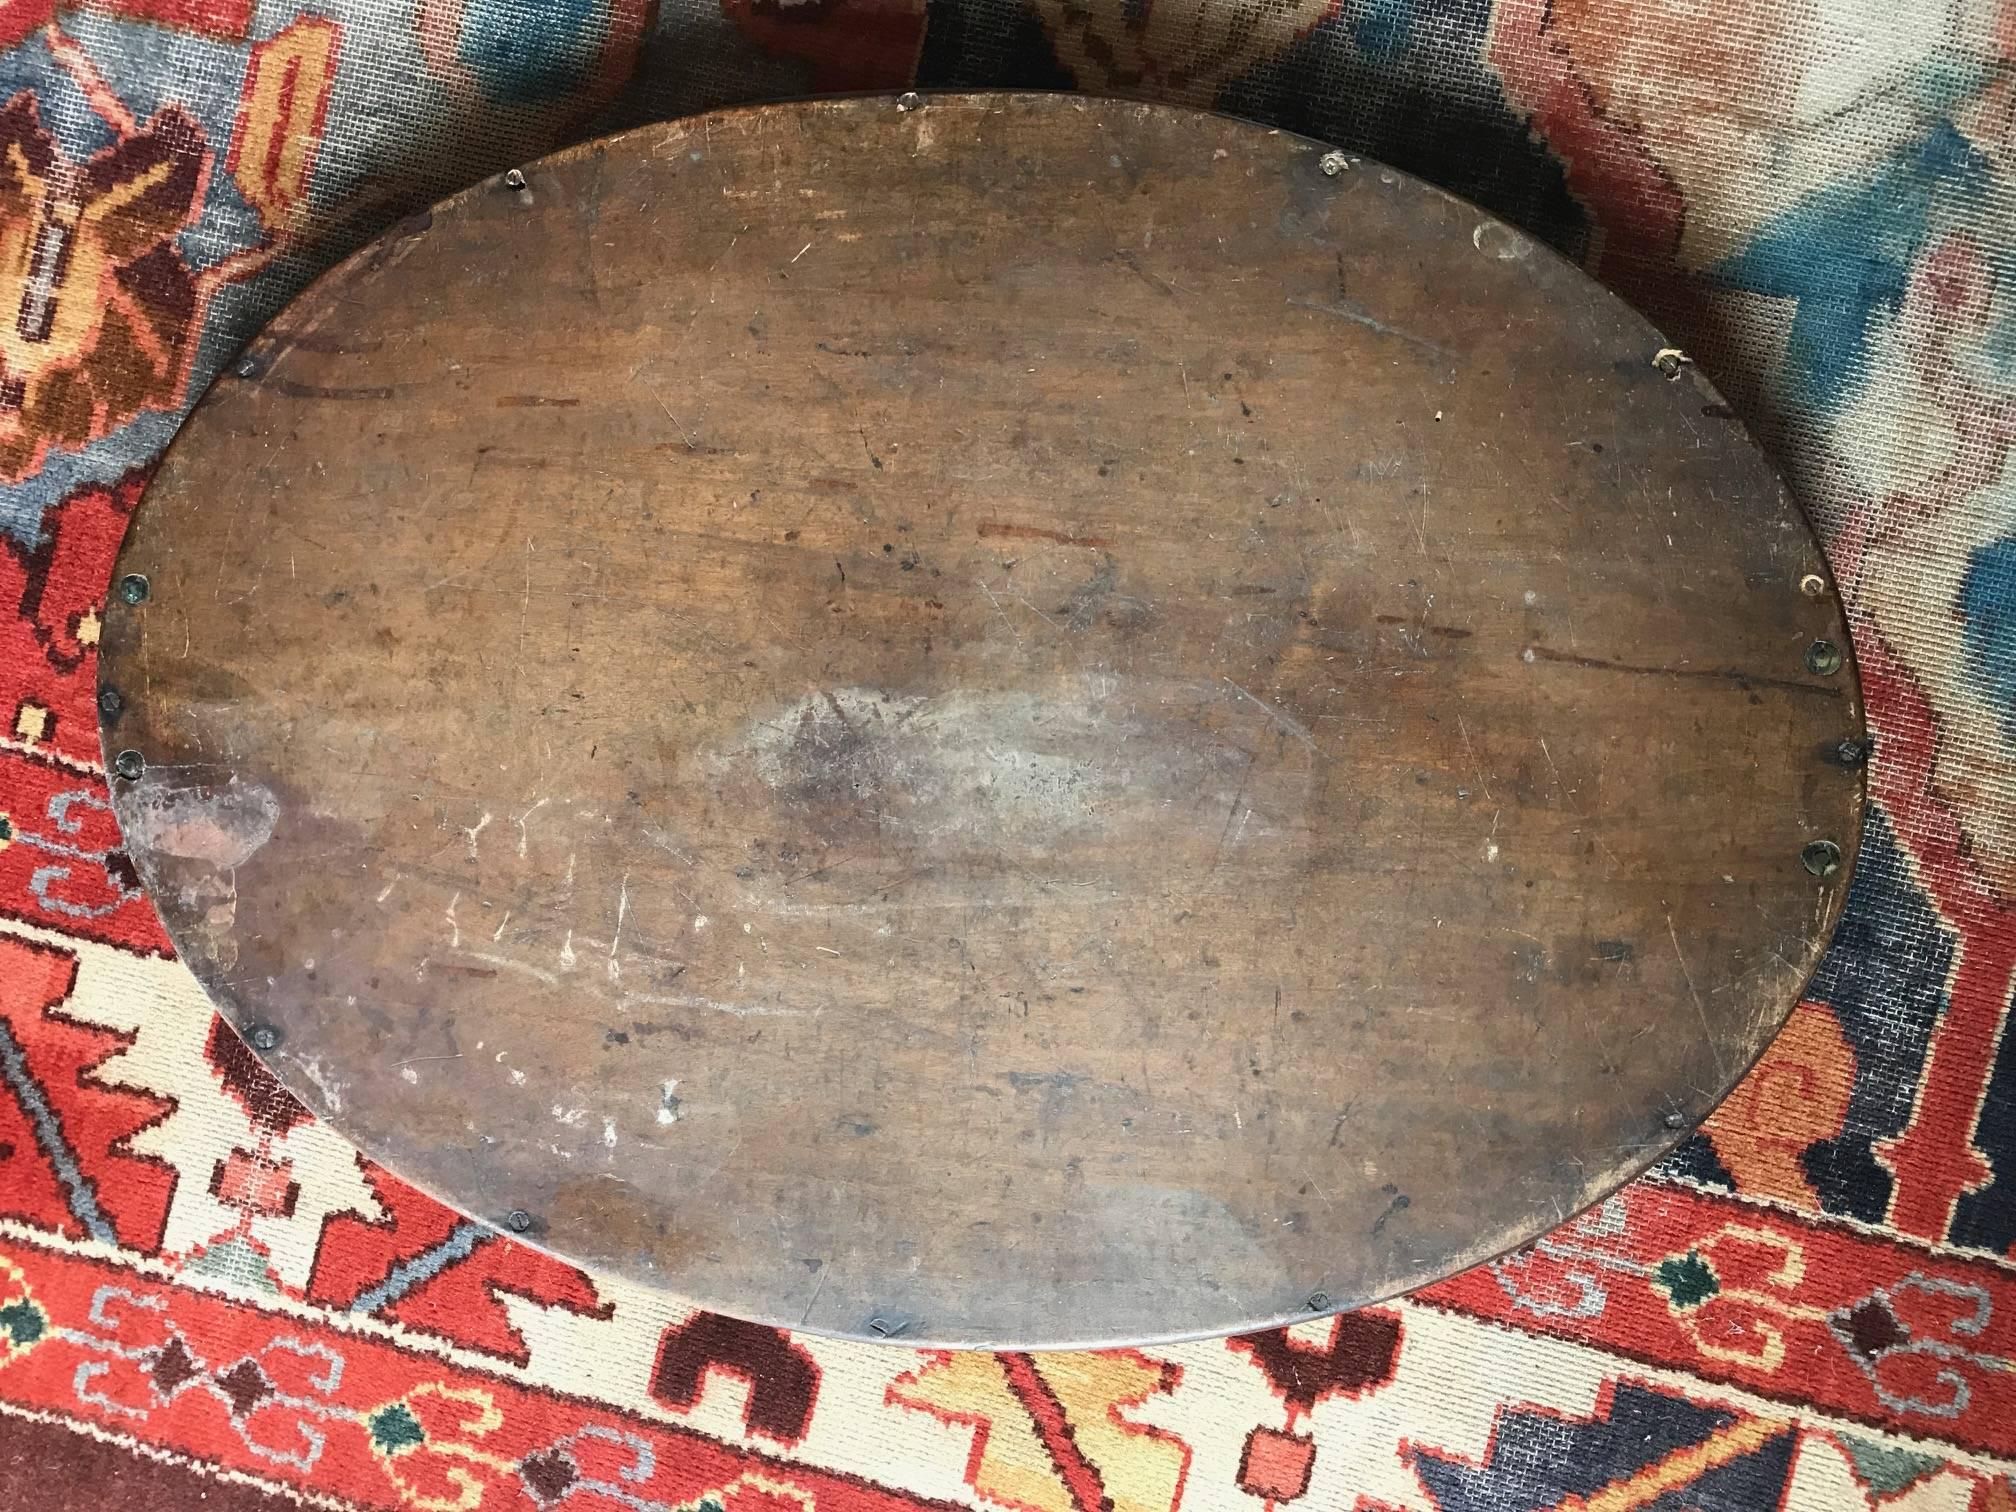 A wonderful early 19th century English Sheraton style oval tray. Painted with an idyllic provincial rural scene. Some signs of previous restoration. In very good condition.